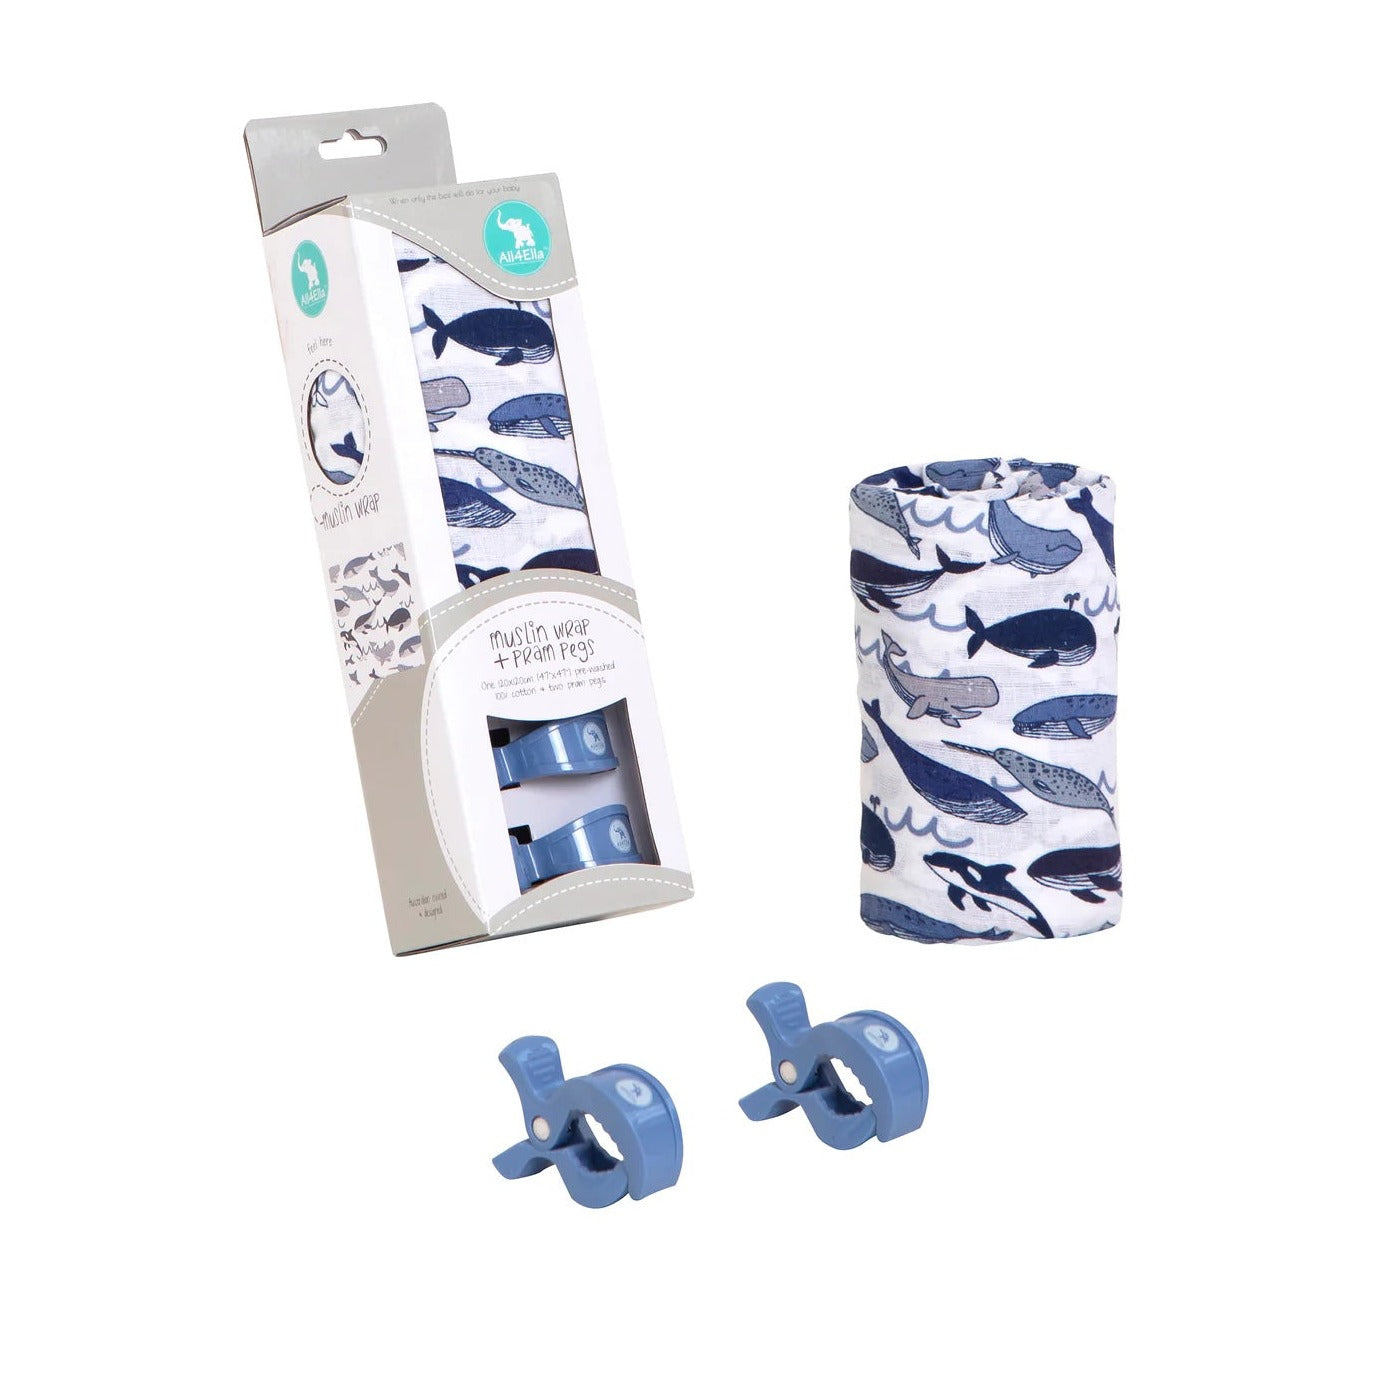 Muslin wrap and pram peg set - angus and dudley